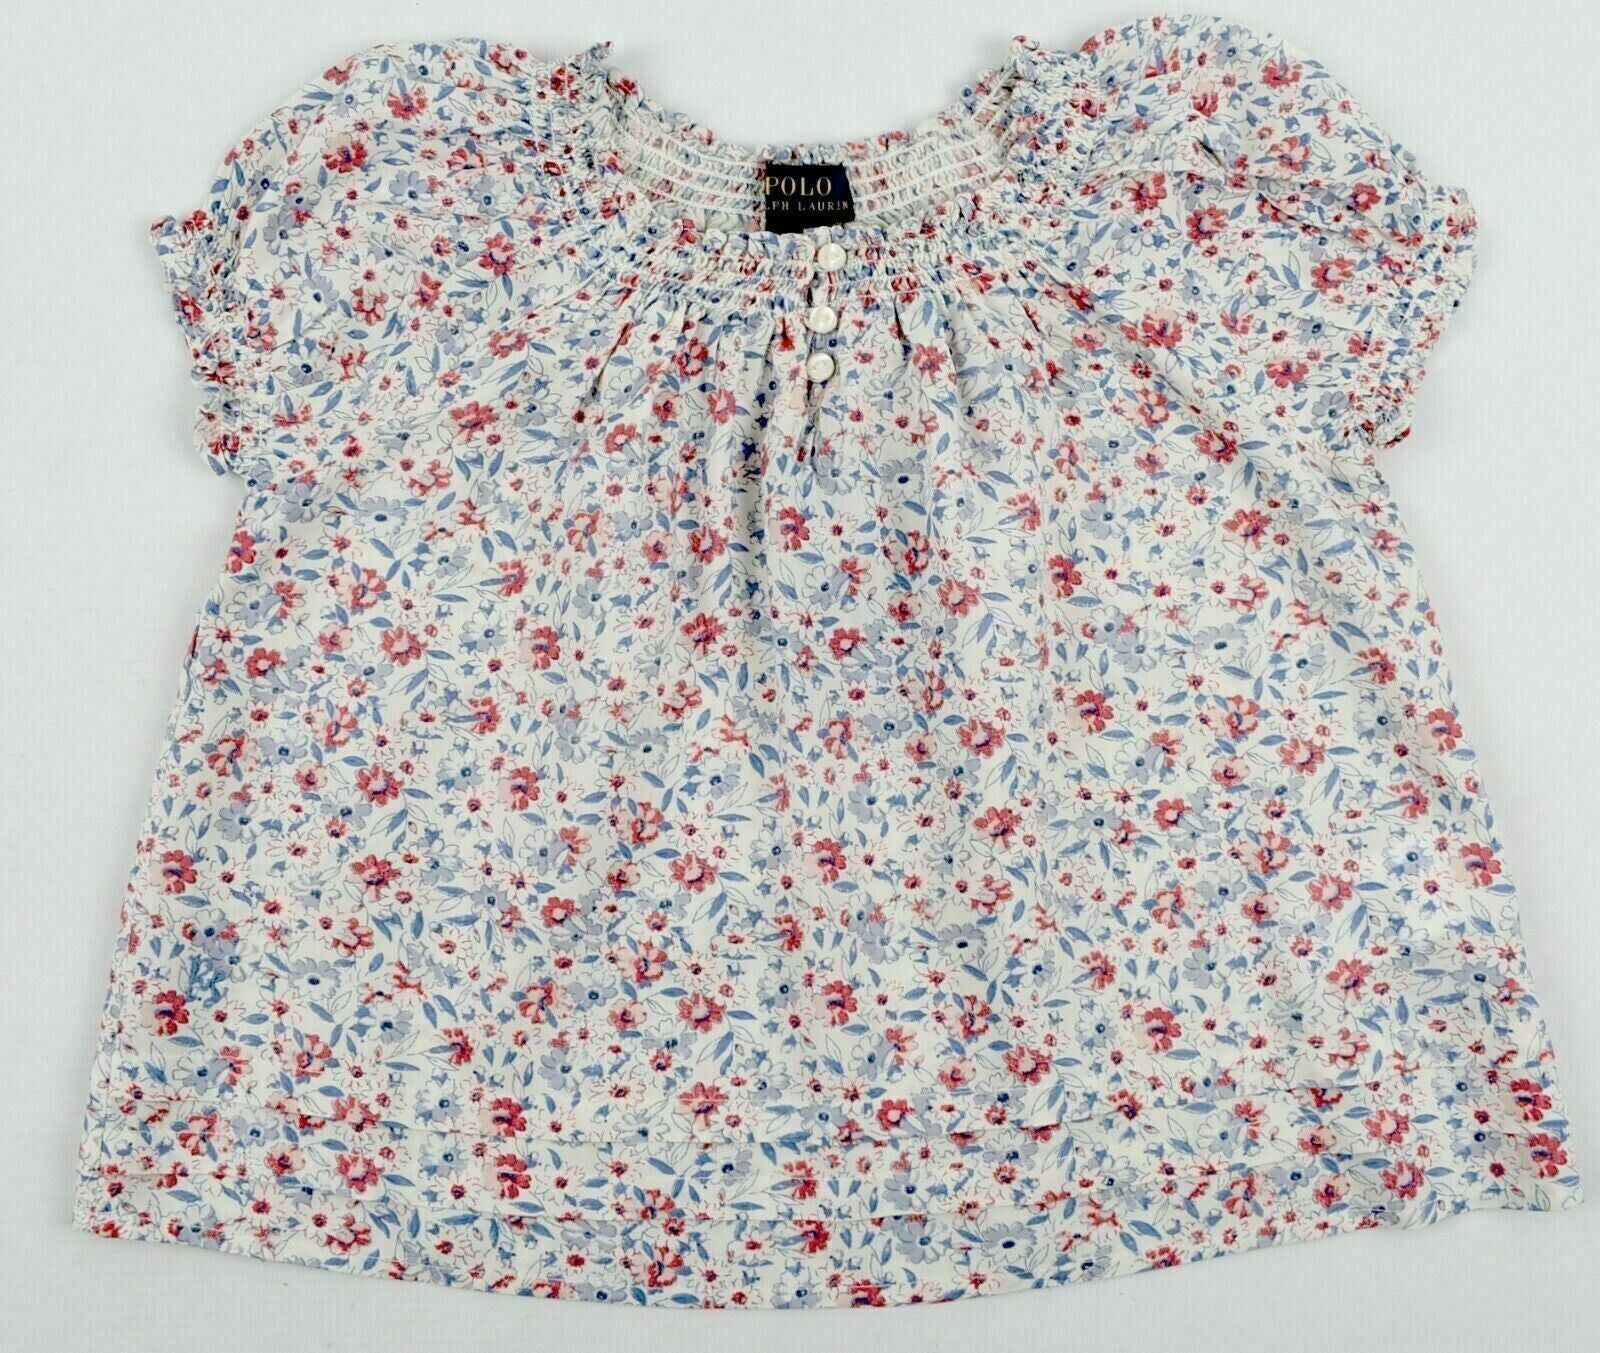 POLO RALPH LAUREN Girls' Short Sleeve Floral Tunic Top, size 6-7 years